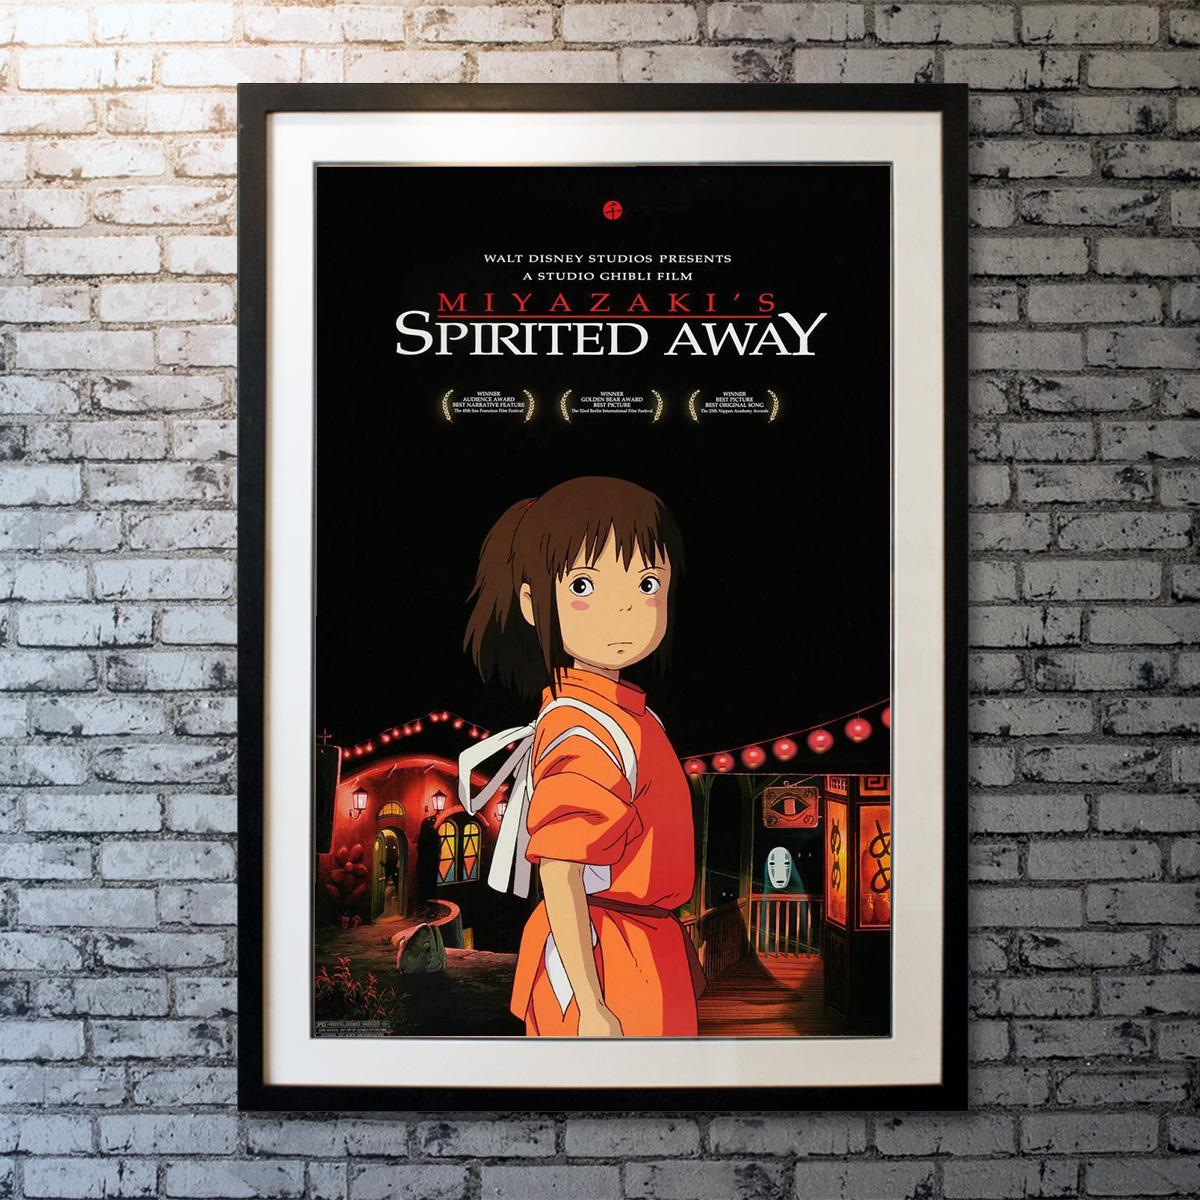 Original double-sided movie poster for 2002 theatrical release in USA, Studio Ghibli - Miyazaki. In this animated feature by noted Japanese director Hayao Miyazaki, 10-year-old Chihiro (Rumi Hiiragi) and her parents (Takashi Naitô, Yasuko Sawaguchi)